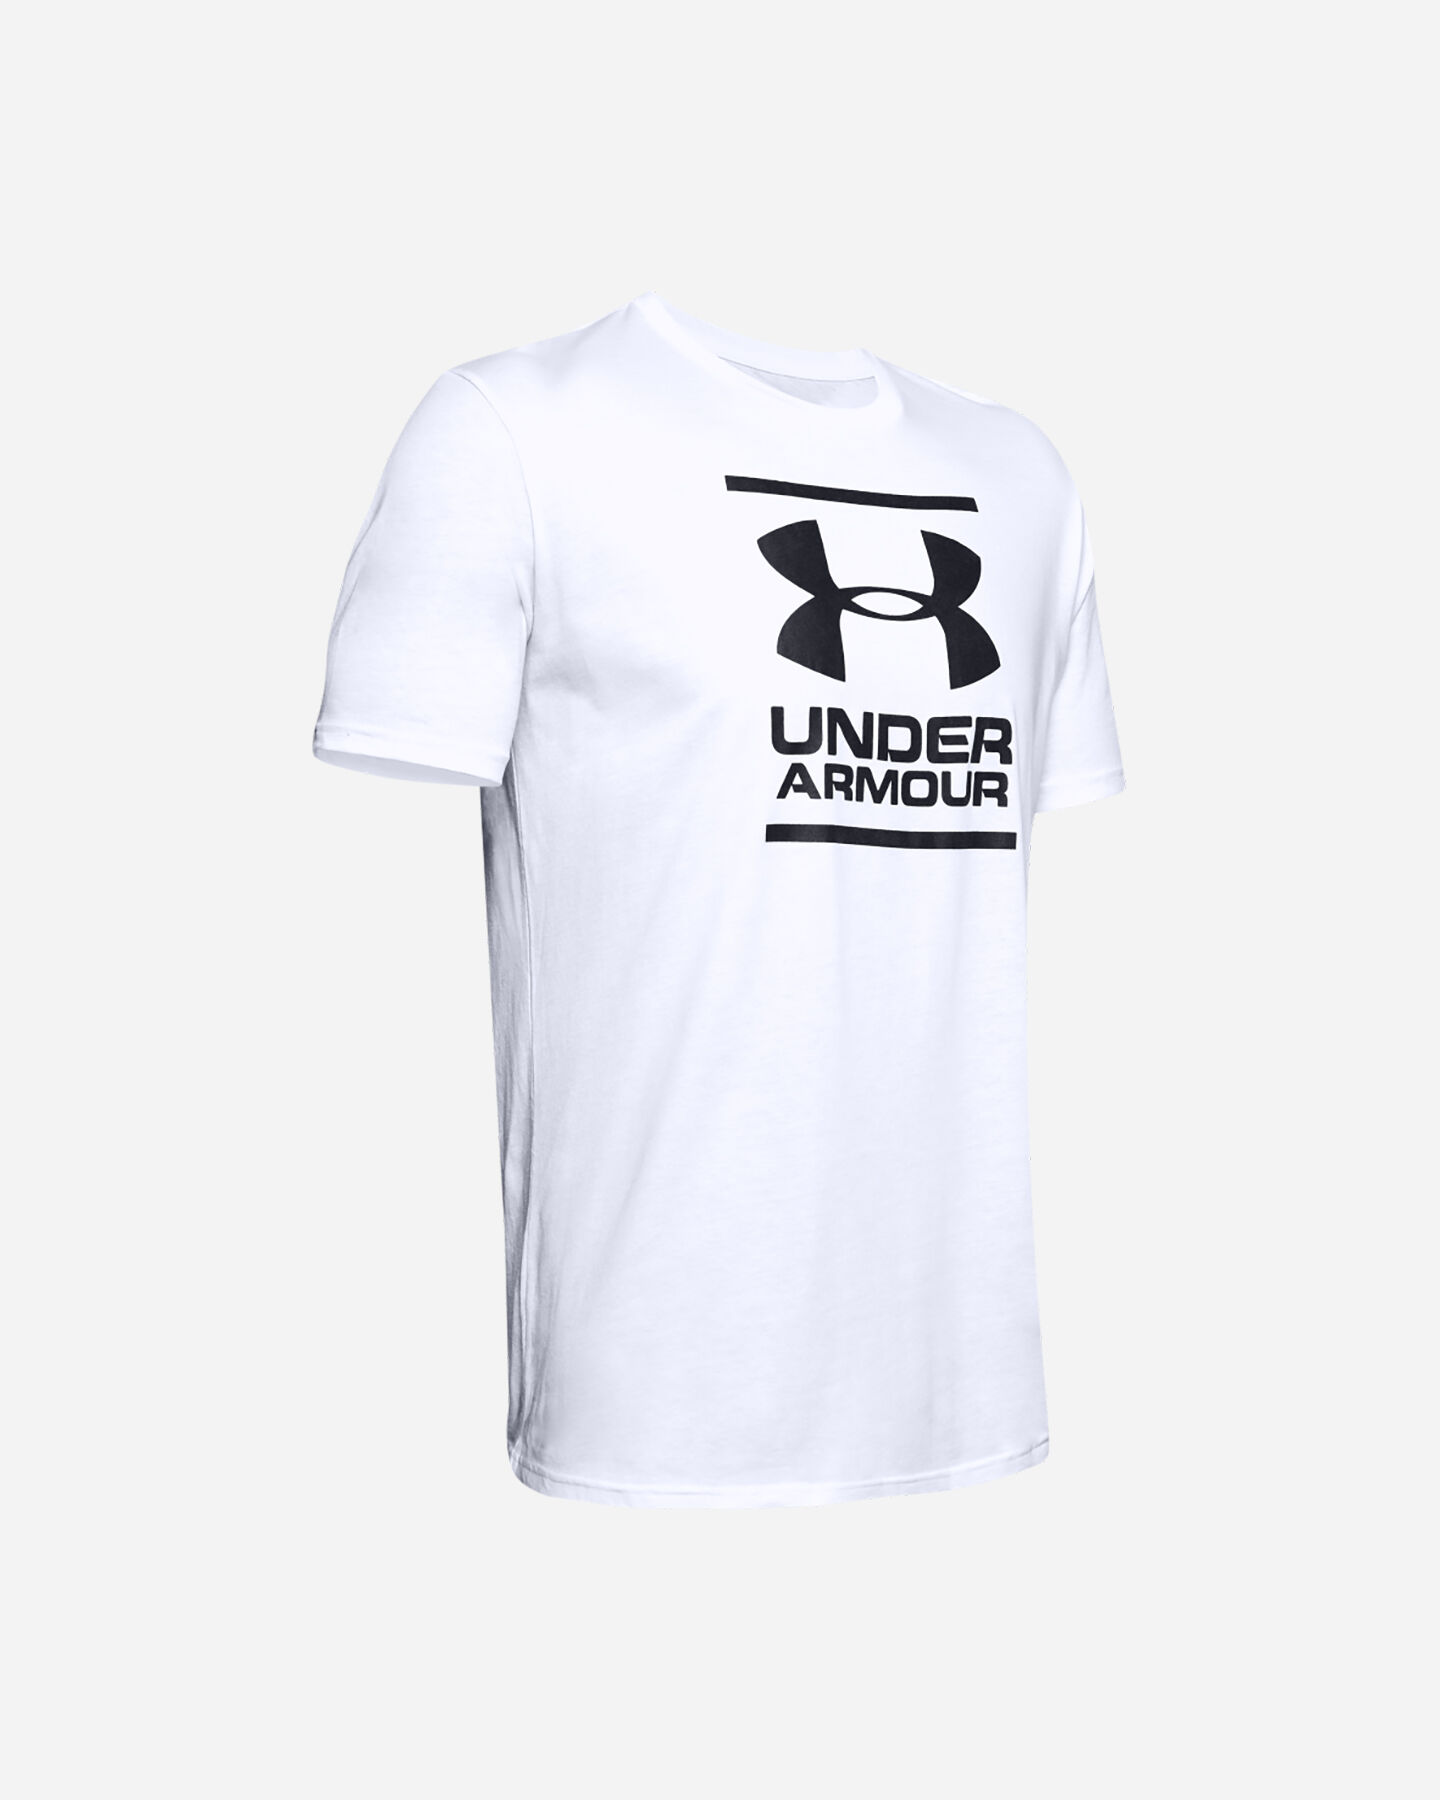  T-Shirt training UNDER ARMOUR FOUNDATION M S2025364|0100|SM scatto 2